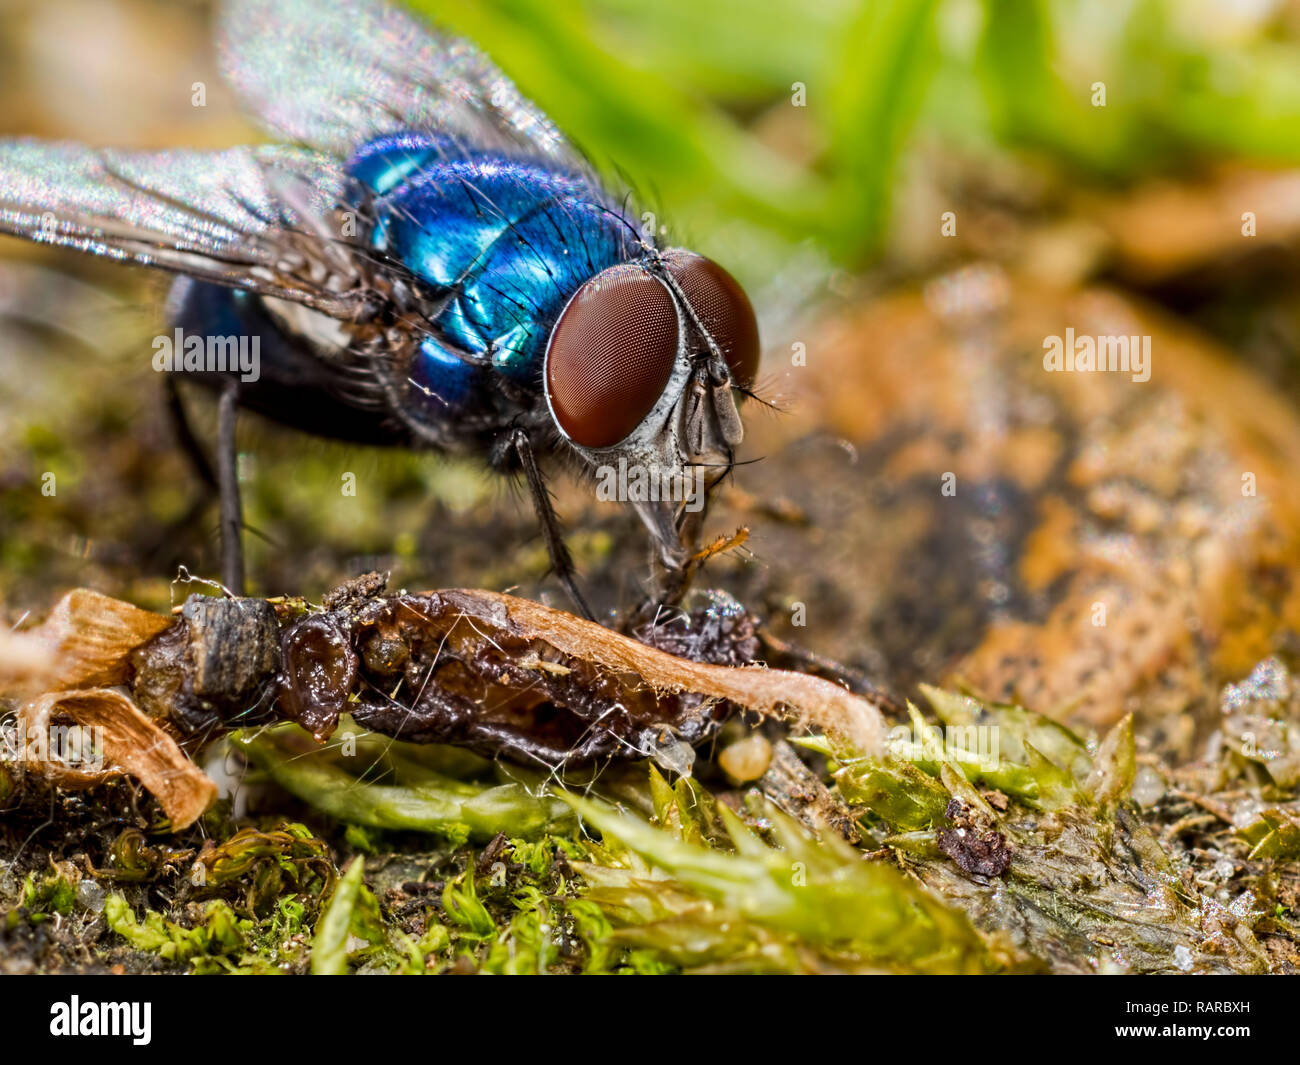 A bluebottle blowfly slurping up the decaying remains of another insect, found on a path at Blashford Lakes nature reserve in Hampshire Stock Photo